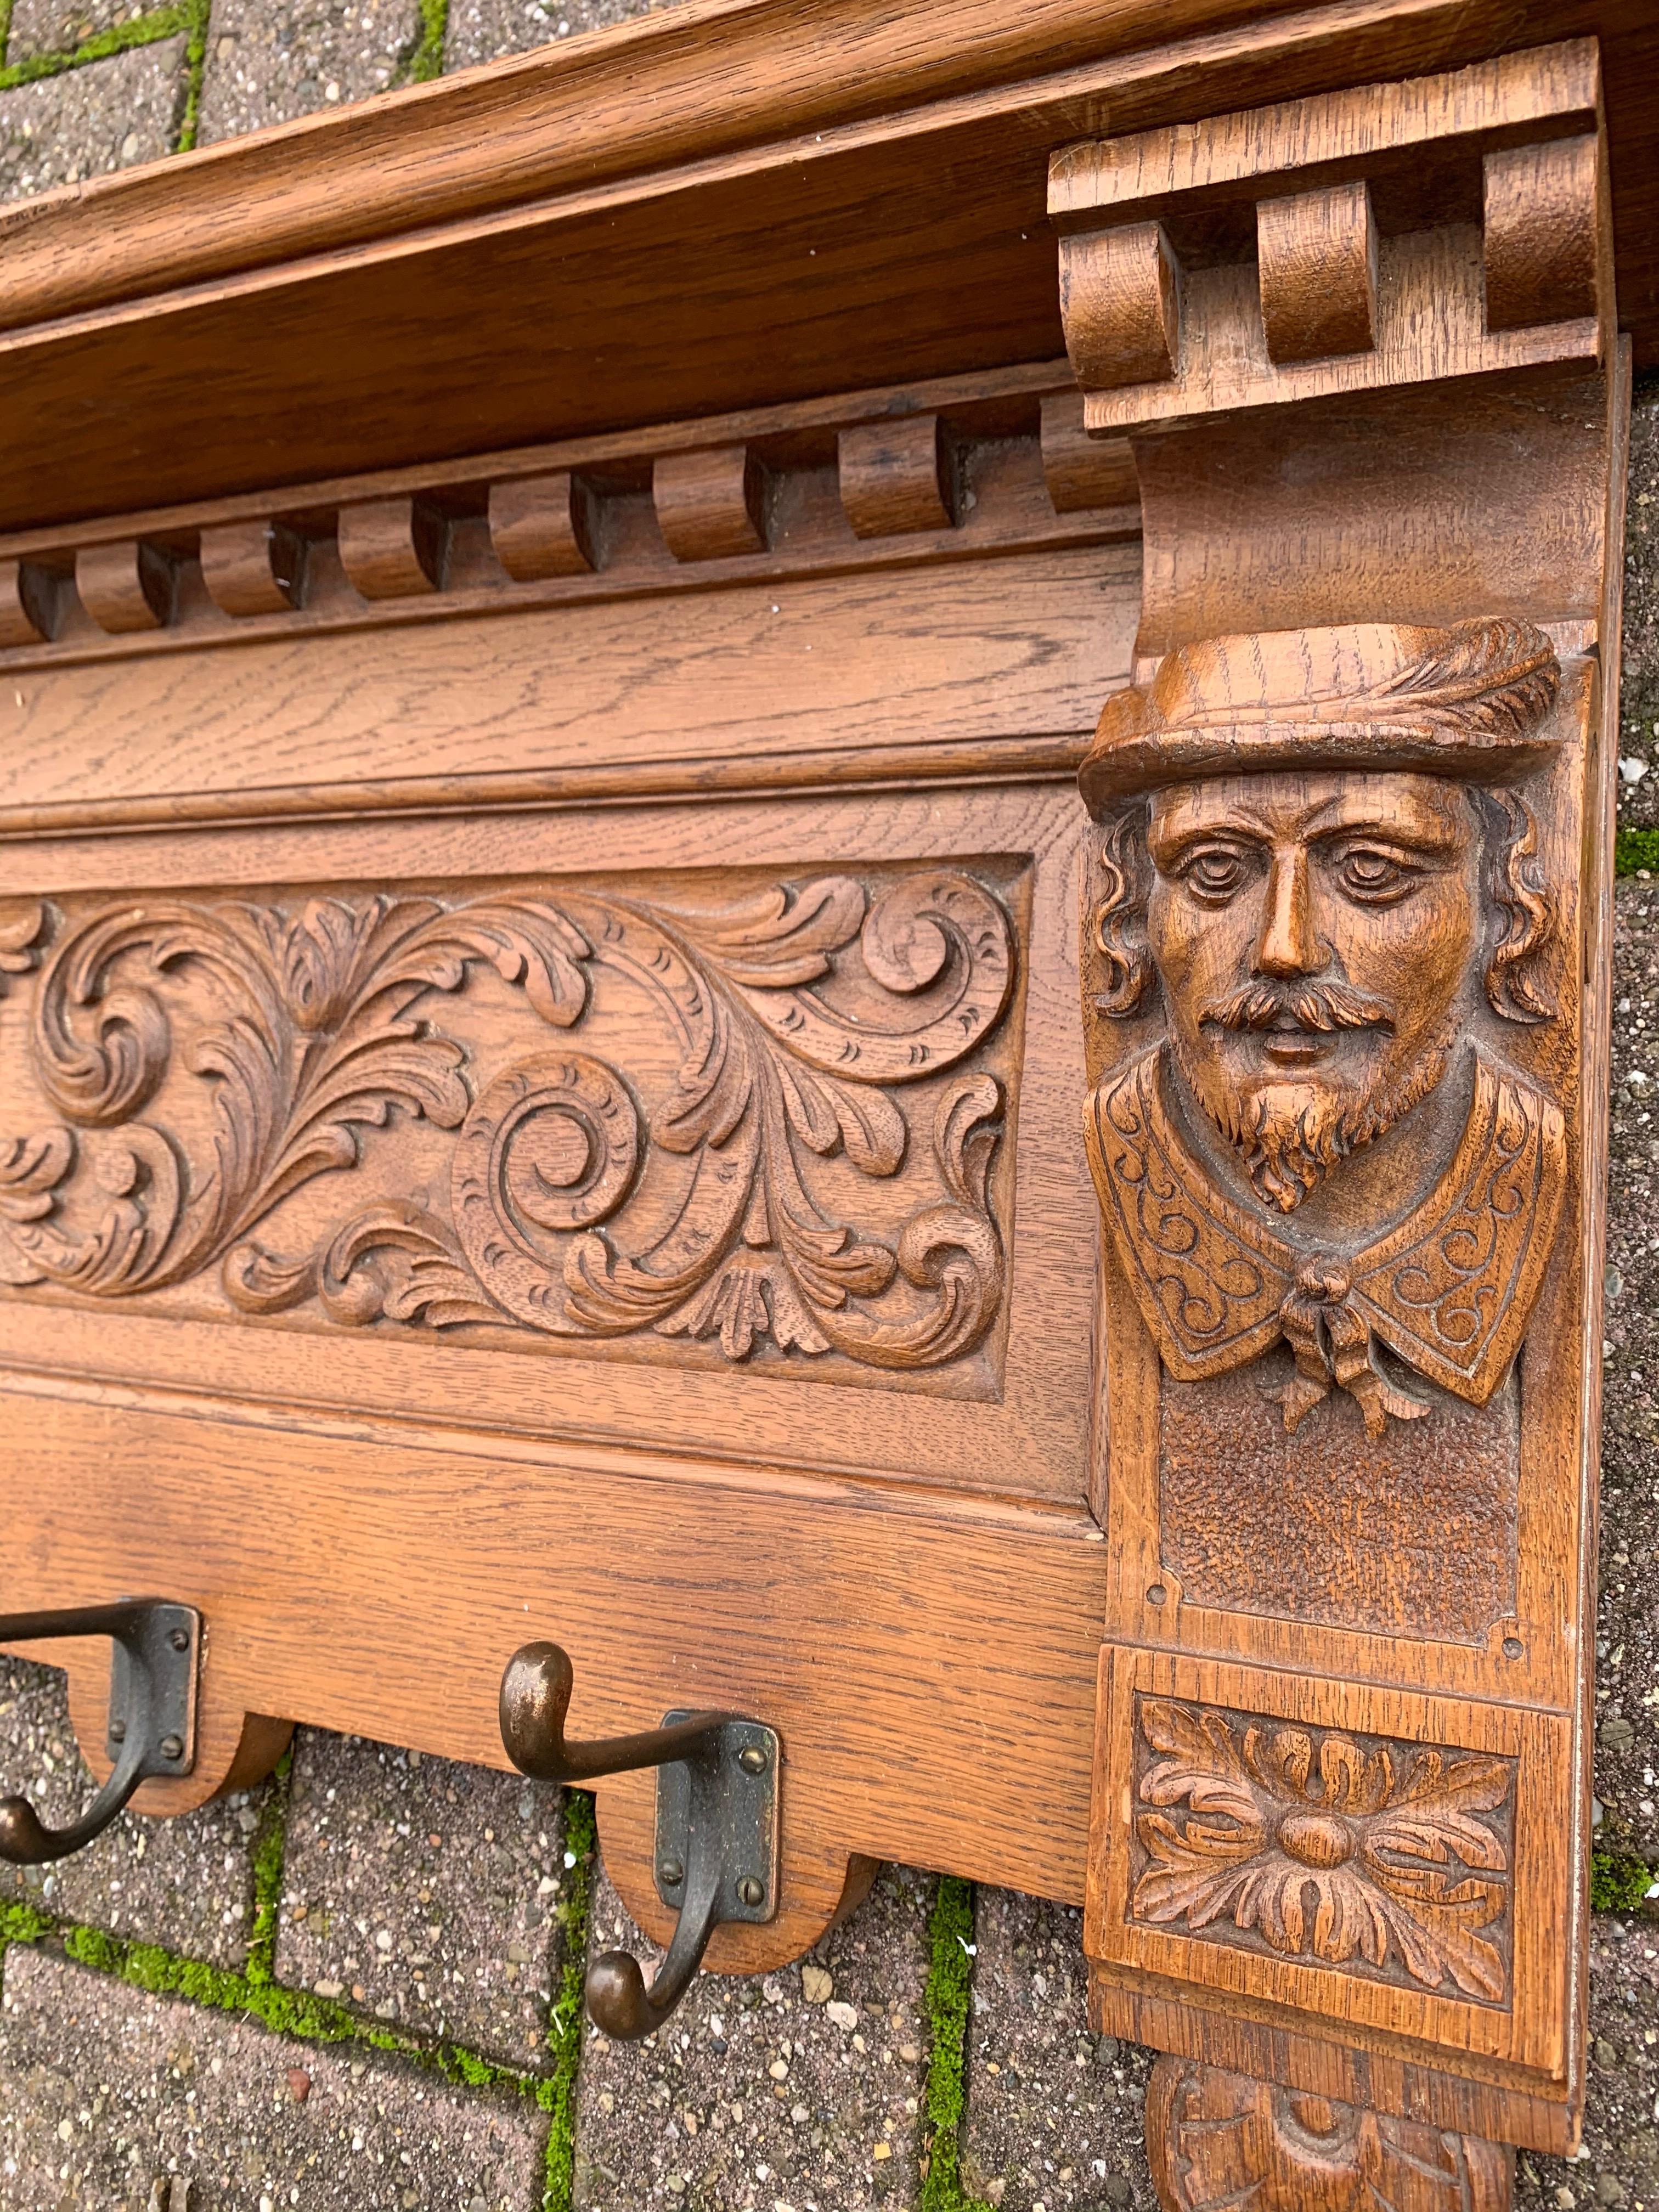 Hand-Carved Early 1900s Renaissance Revival Wall Coat Rack with Masks & Green Man Sculpture